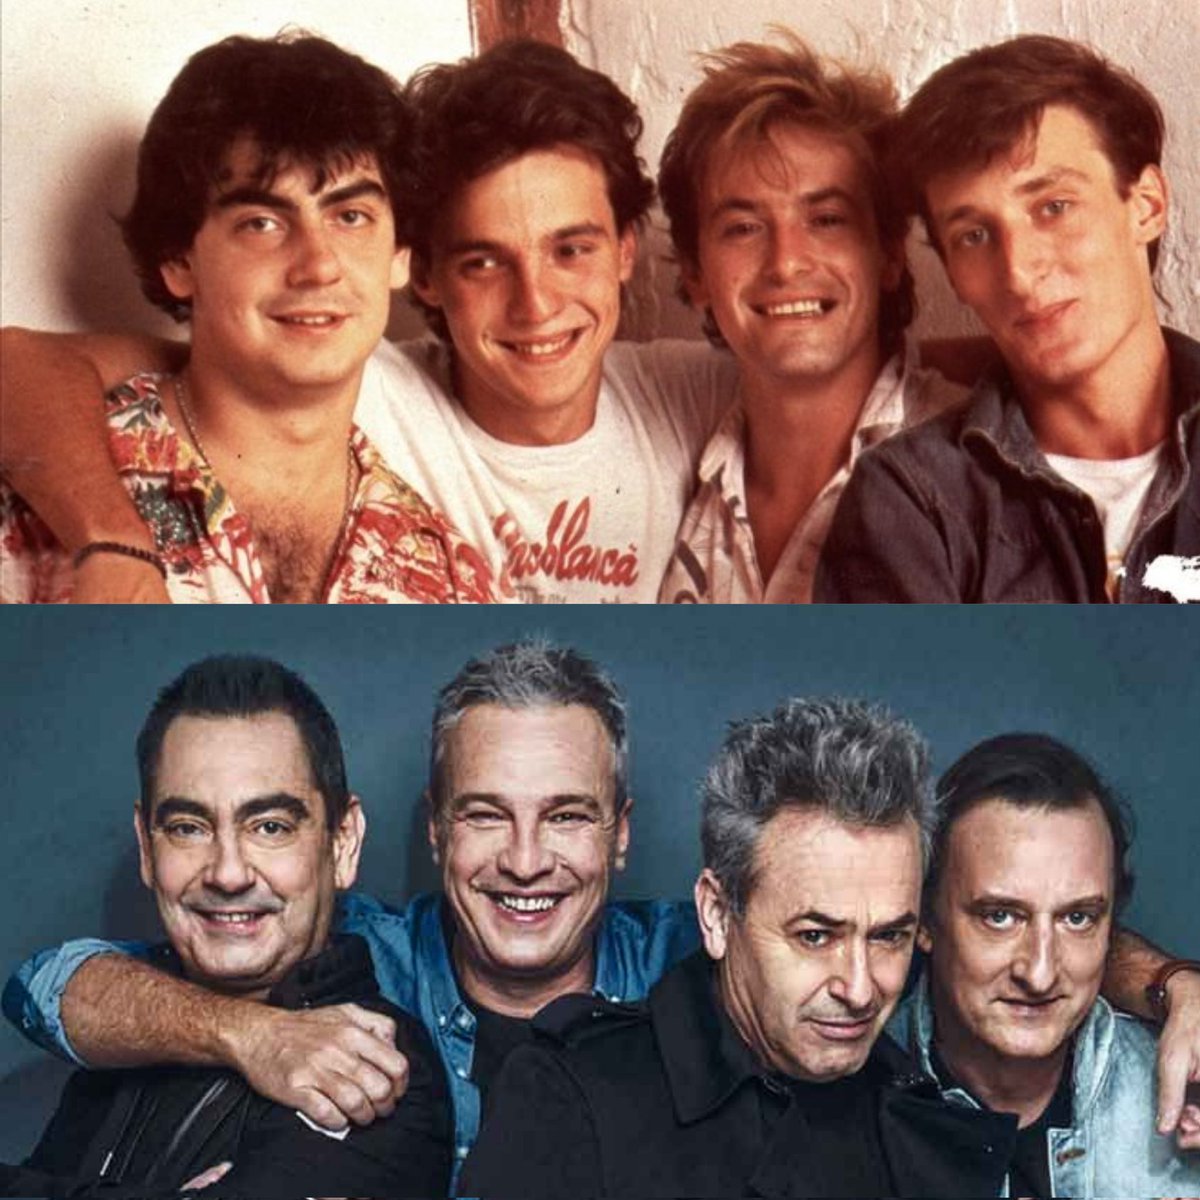 Two pictures taken just under 4 decades apart #HombresG are soon going to celebrate their 40-year anniversary They've been through thick and thin together, so much so that one can not describe them as just band-mates, but as brothers Here's to many more 🥳